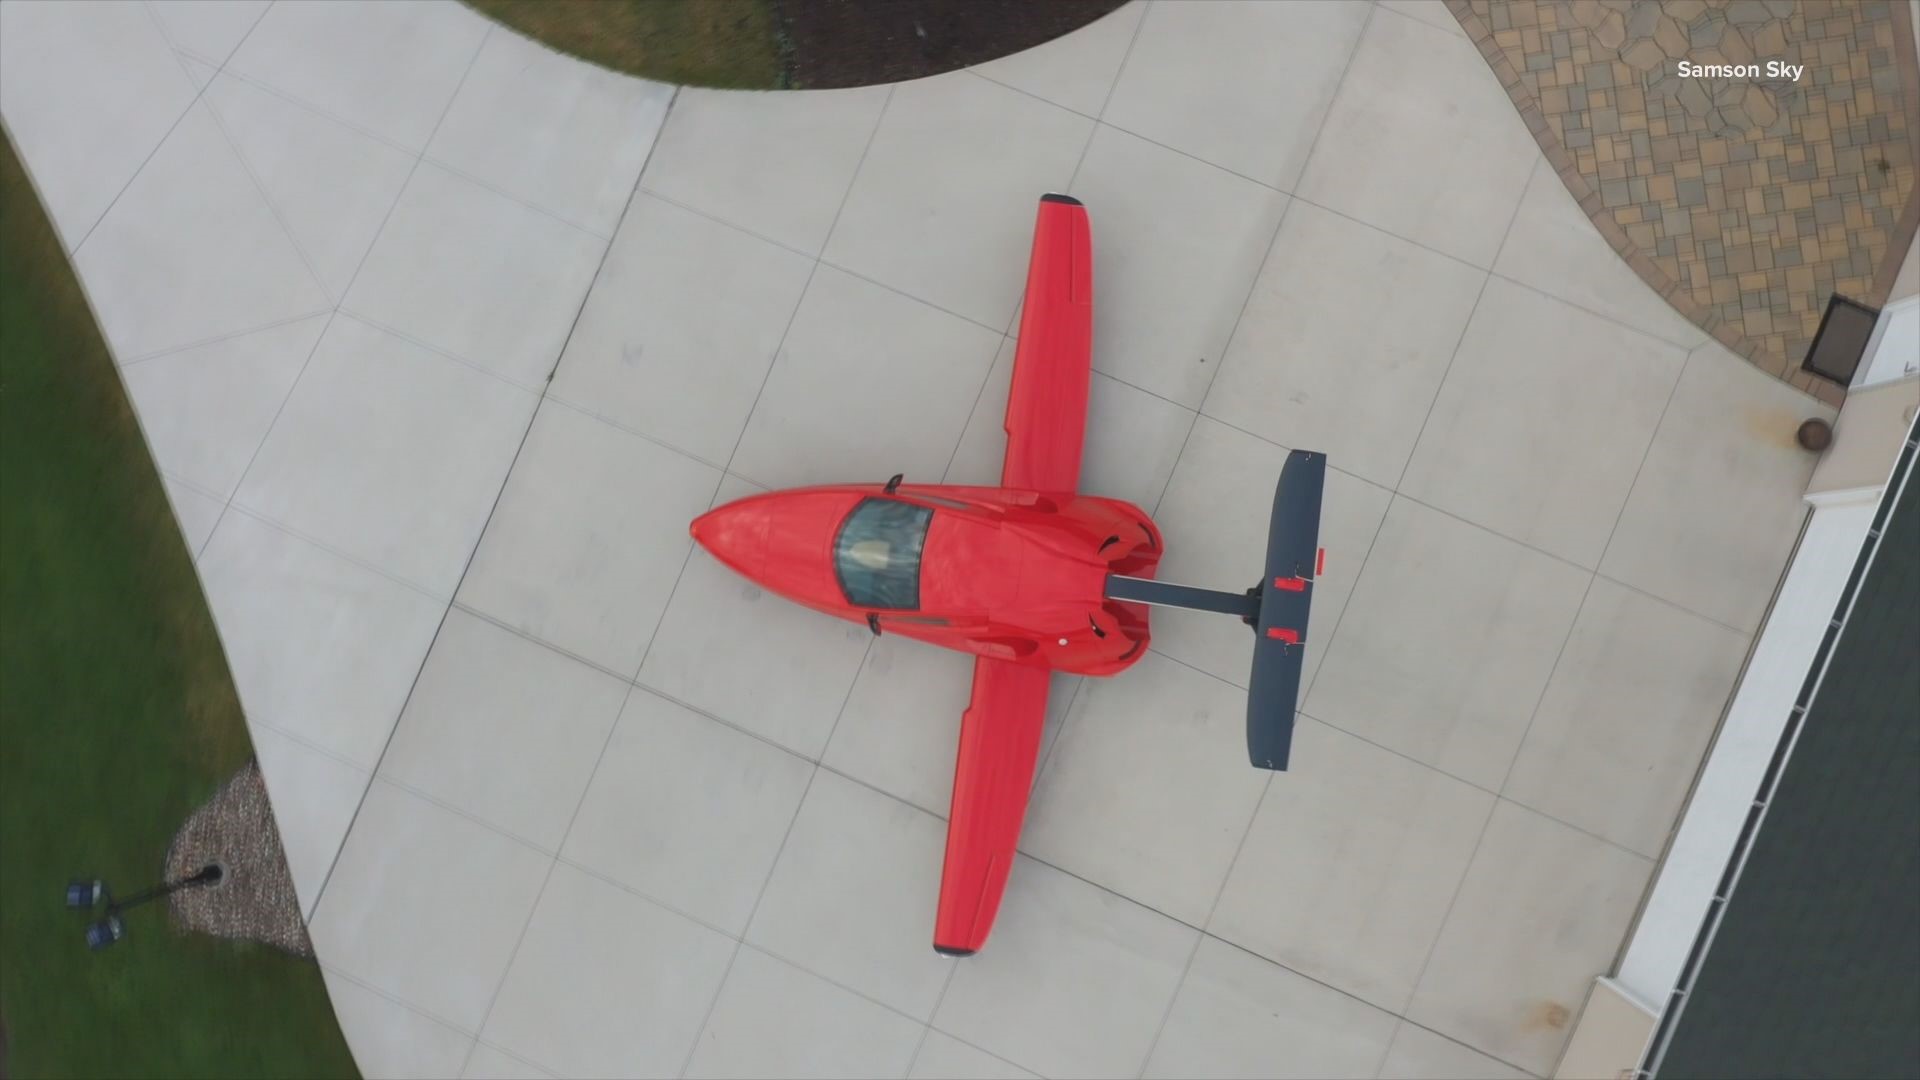 Watch: Sports car turns into airplane in minutes, completes maiden